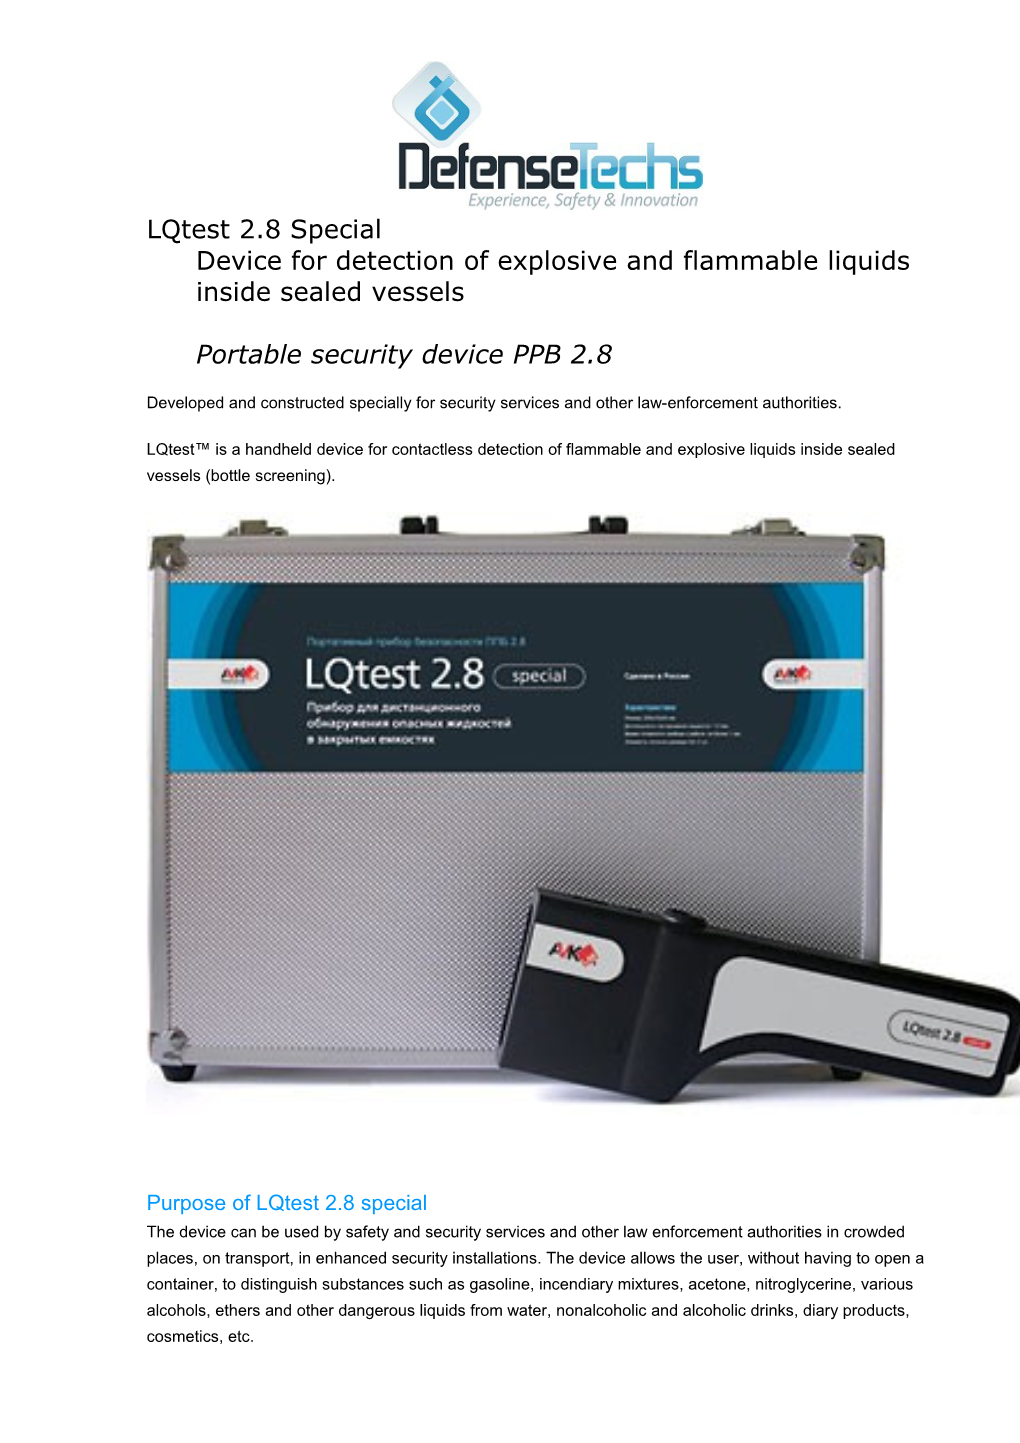 Lqtest 2.8 Specialdevice for Detection of Explosive and Flammable Liquids Inside Sealed